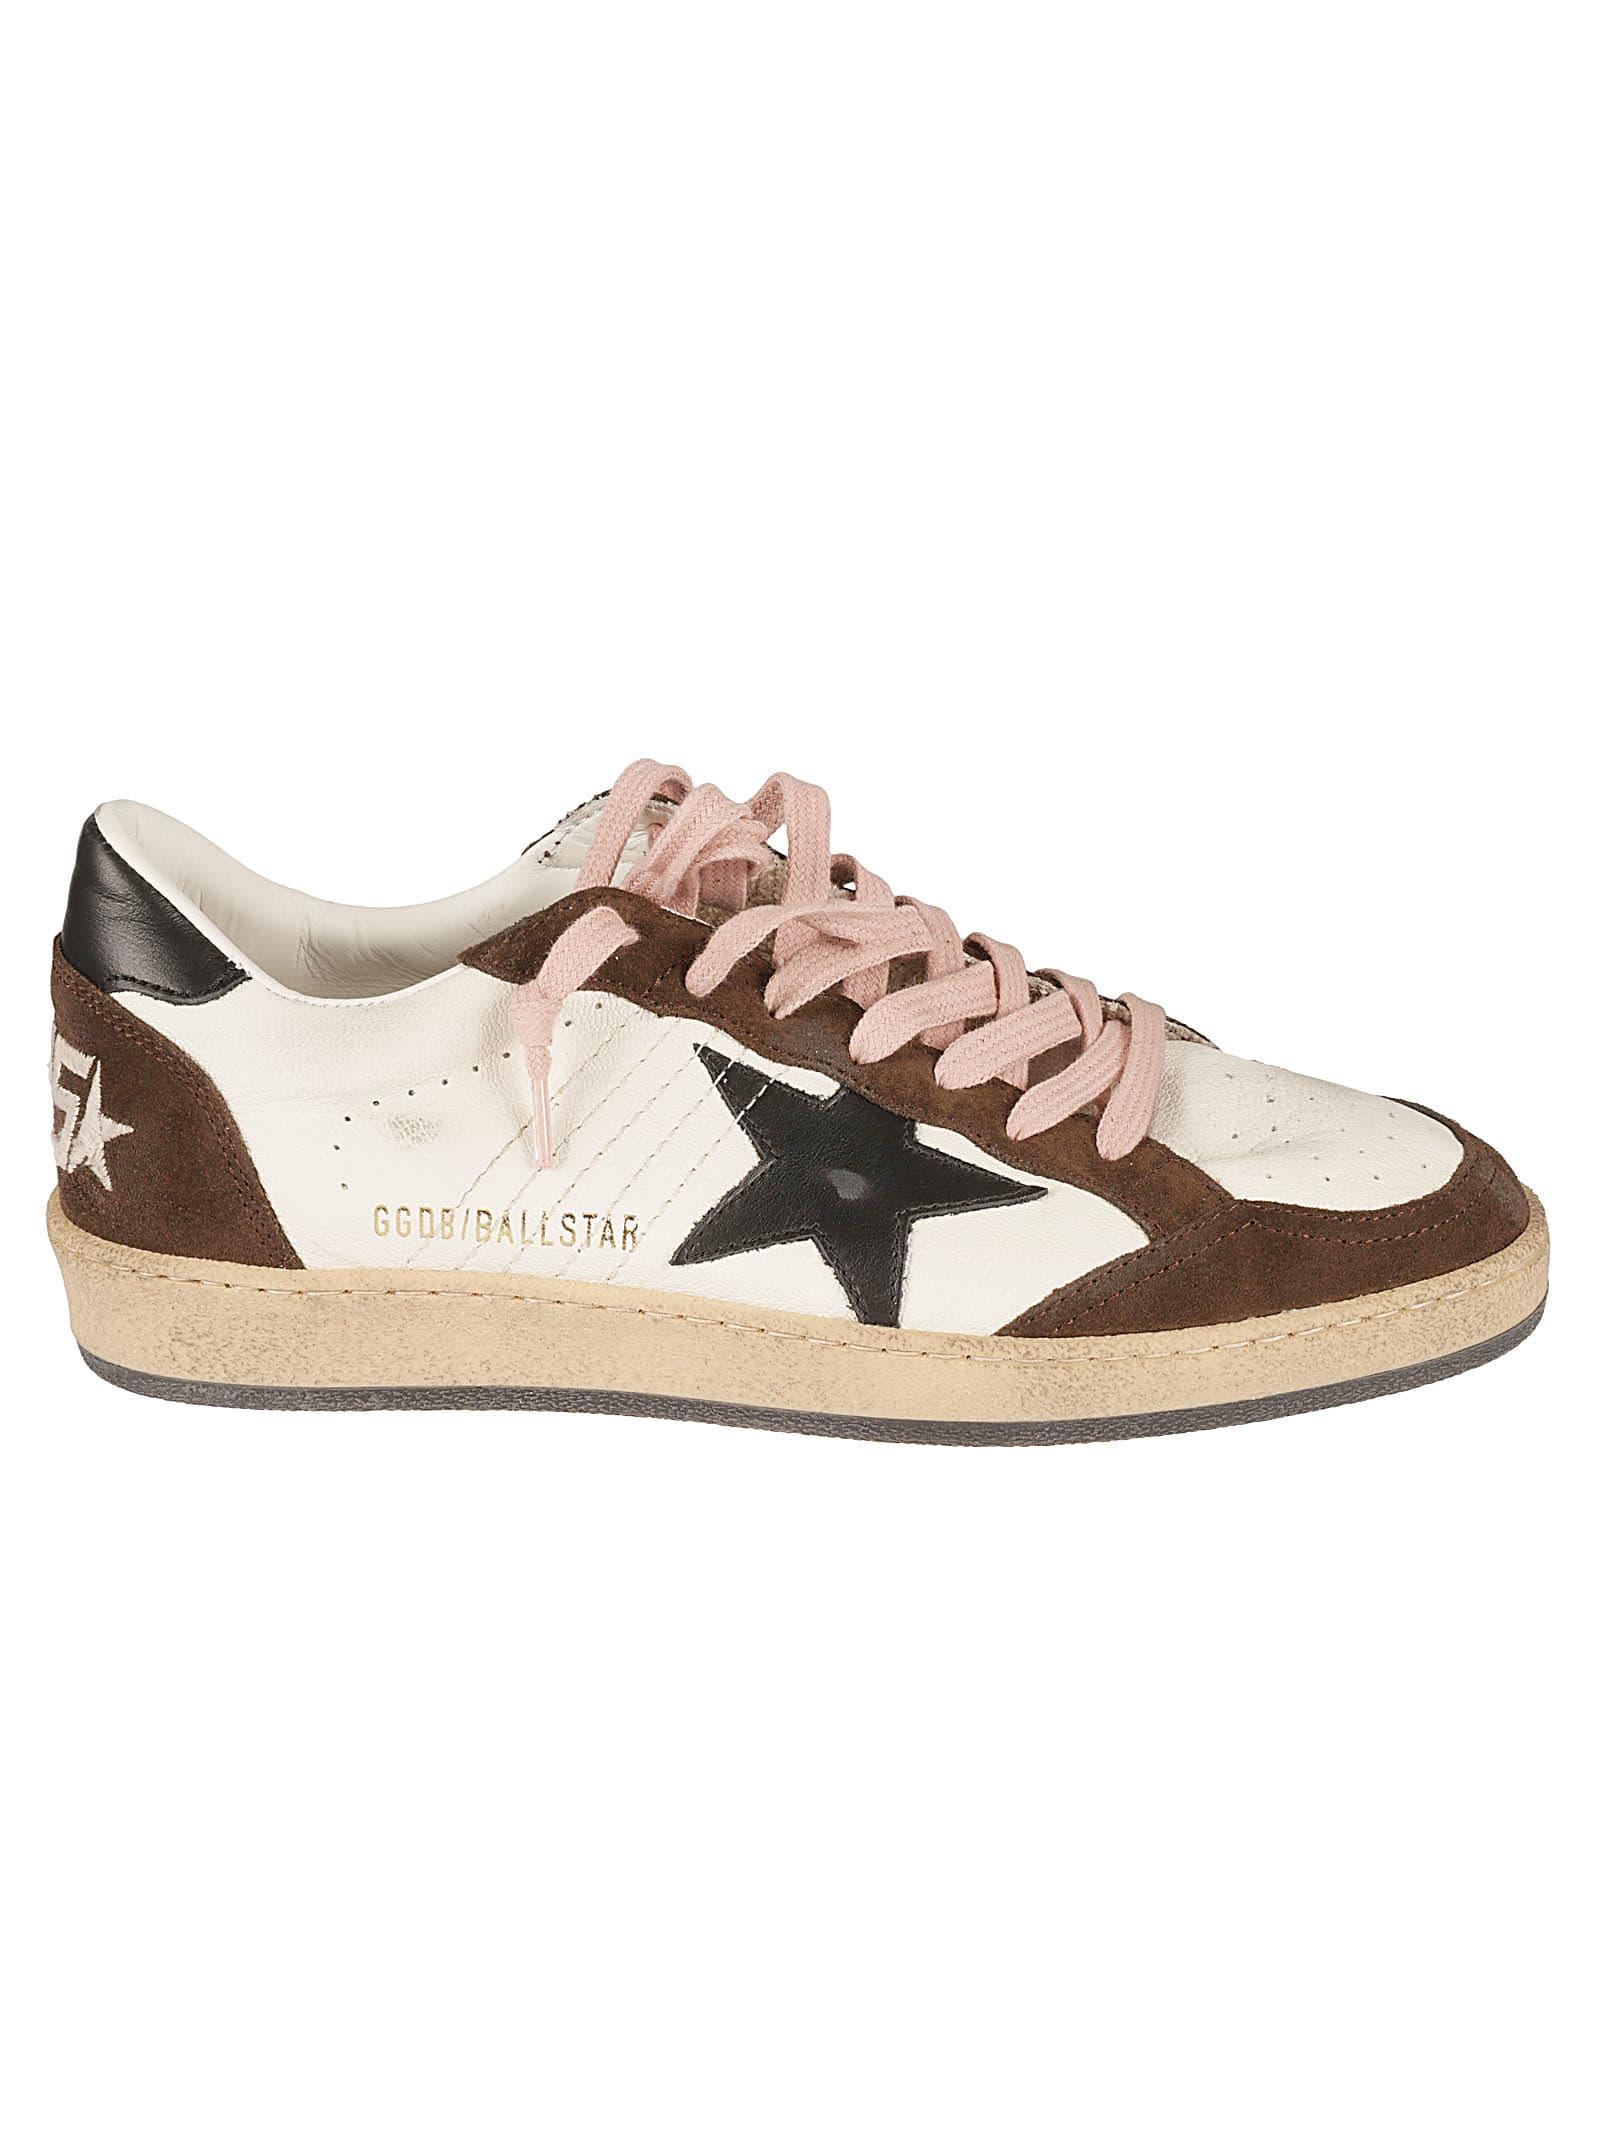 Shop Golden Goose Ball Star Lace-Up Sneakers Saks Fifth, 57% OFF